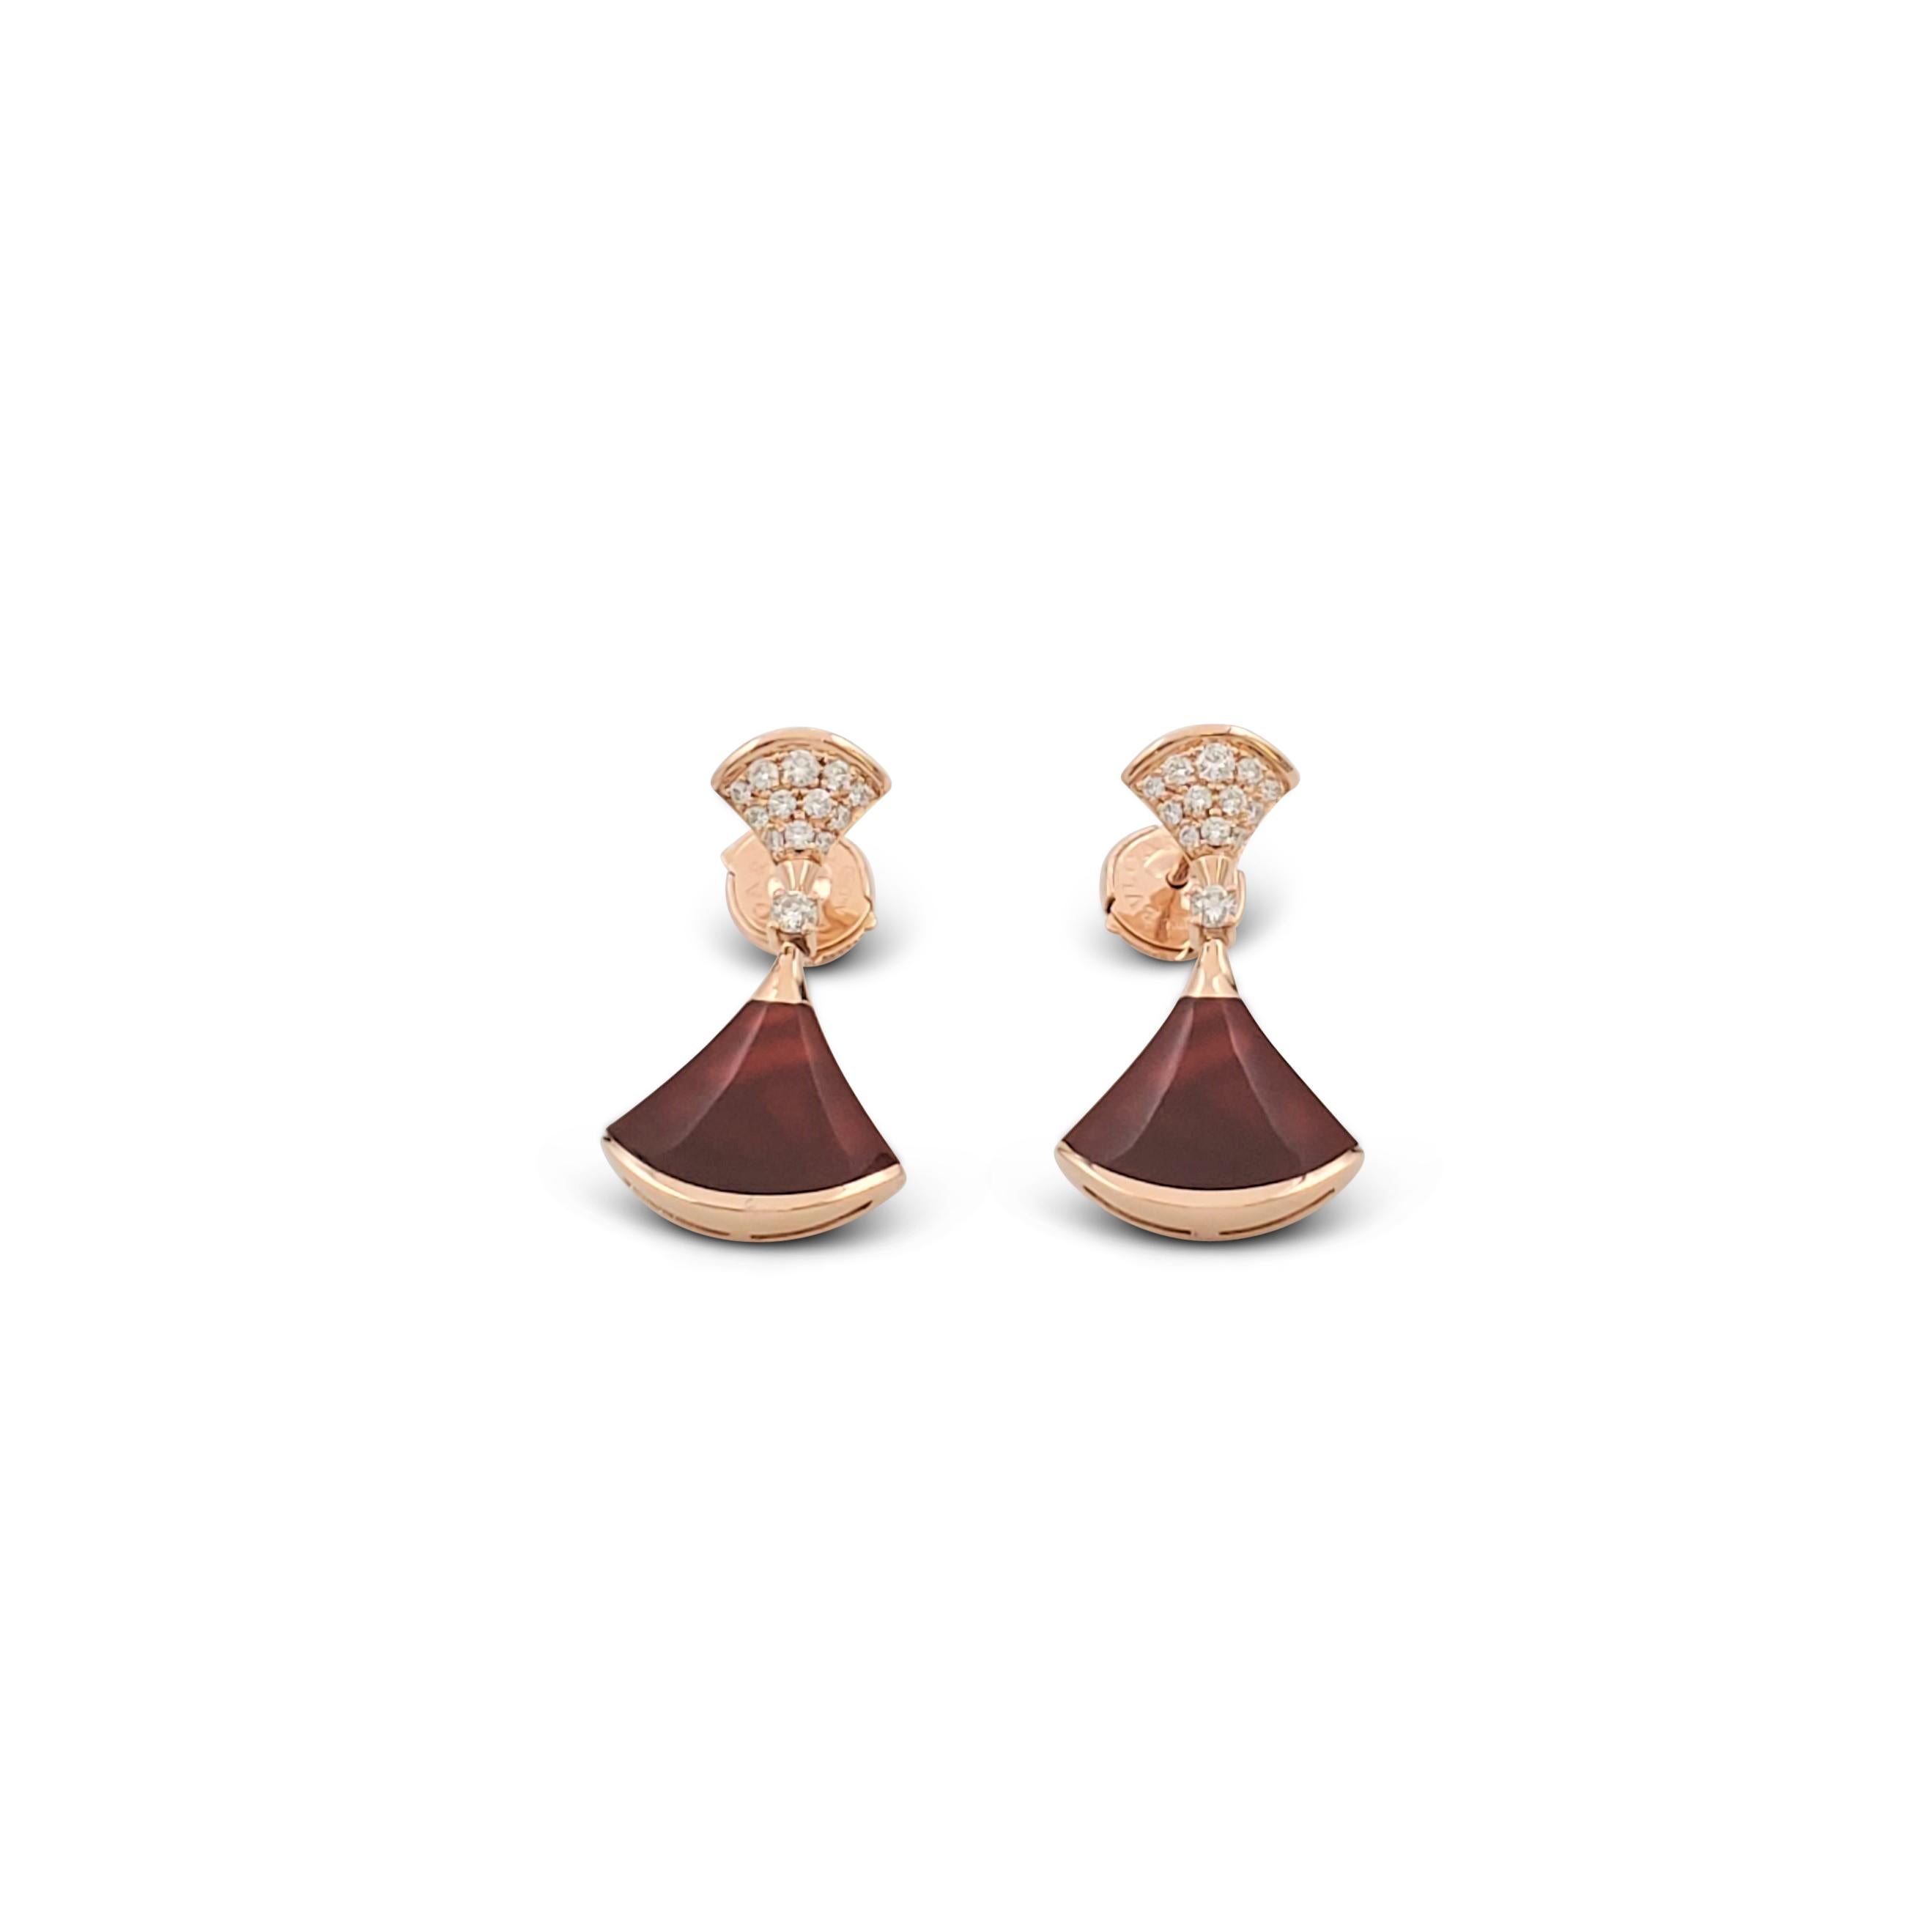 Authentic Bvlgari earrings from the 'Diva's Dream' collection are crafted in 18 karat rose gold. The surmounts are set with round brilliant cut diamonds weighing an estimated 0.30 carats total, suspending a polished carnelian drop. Signed Bvlgari,